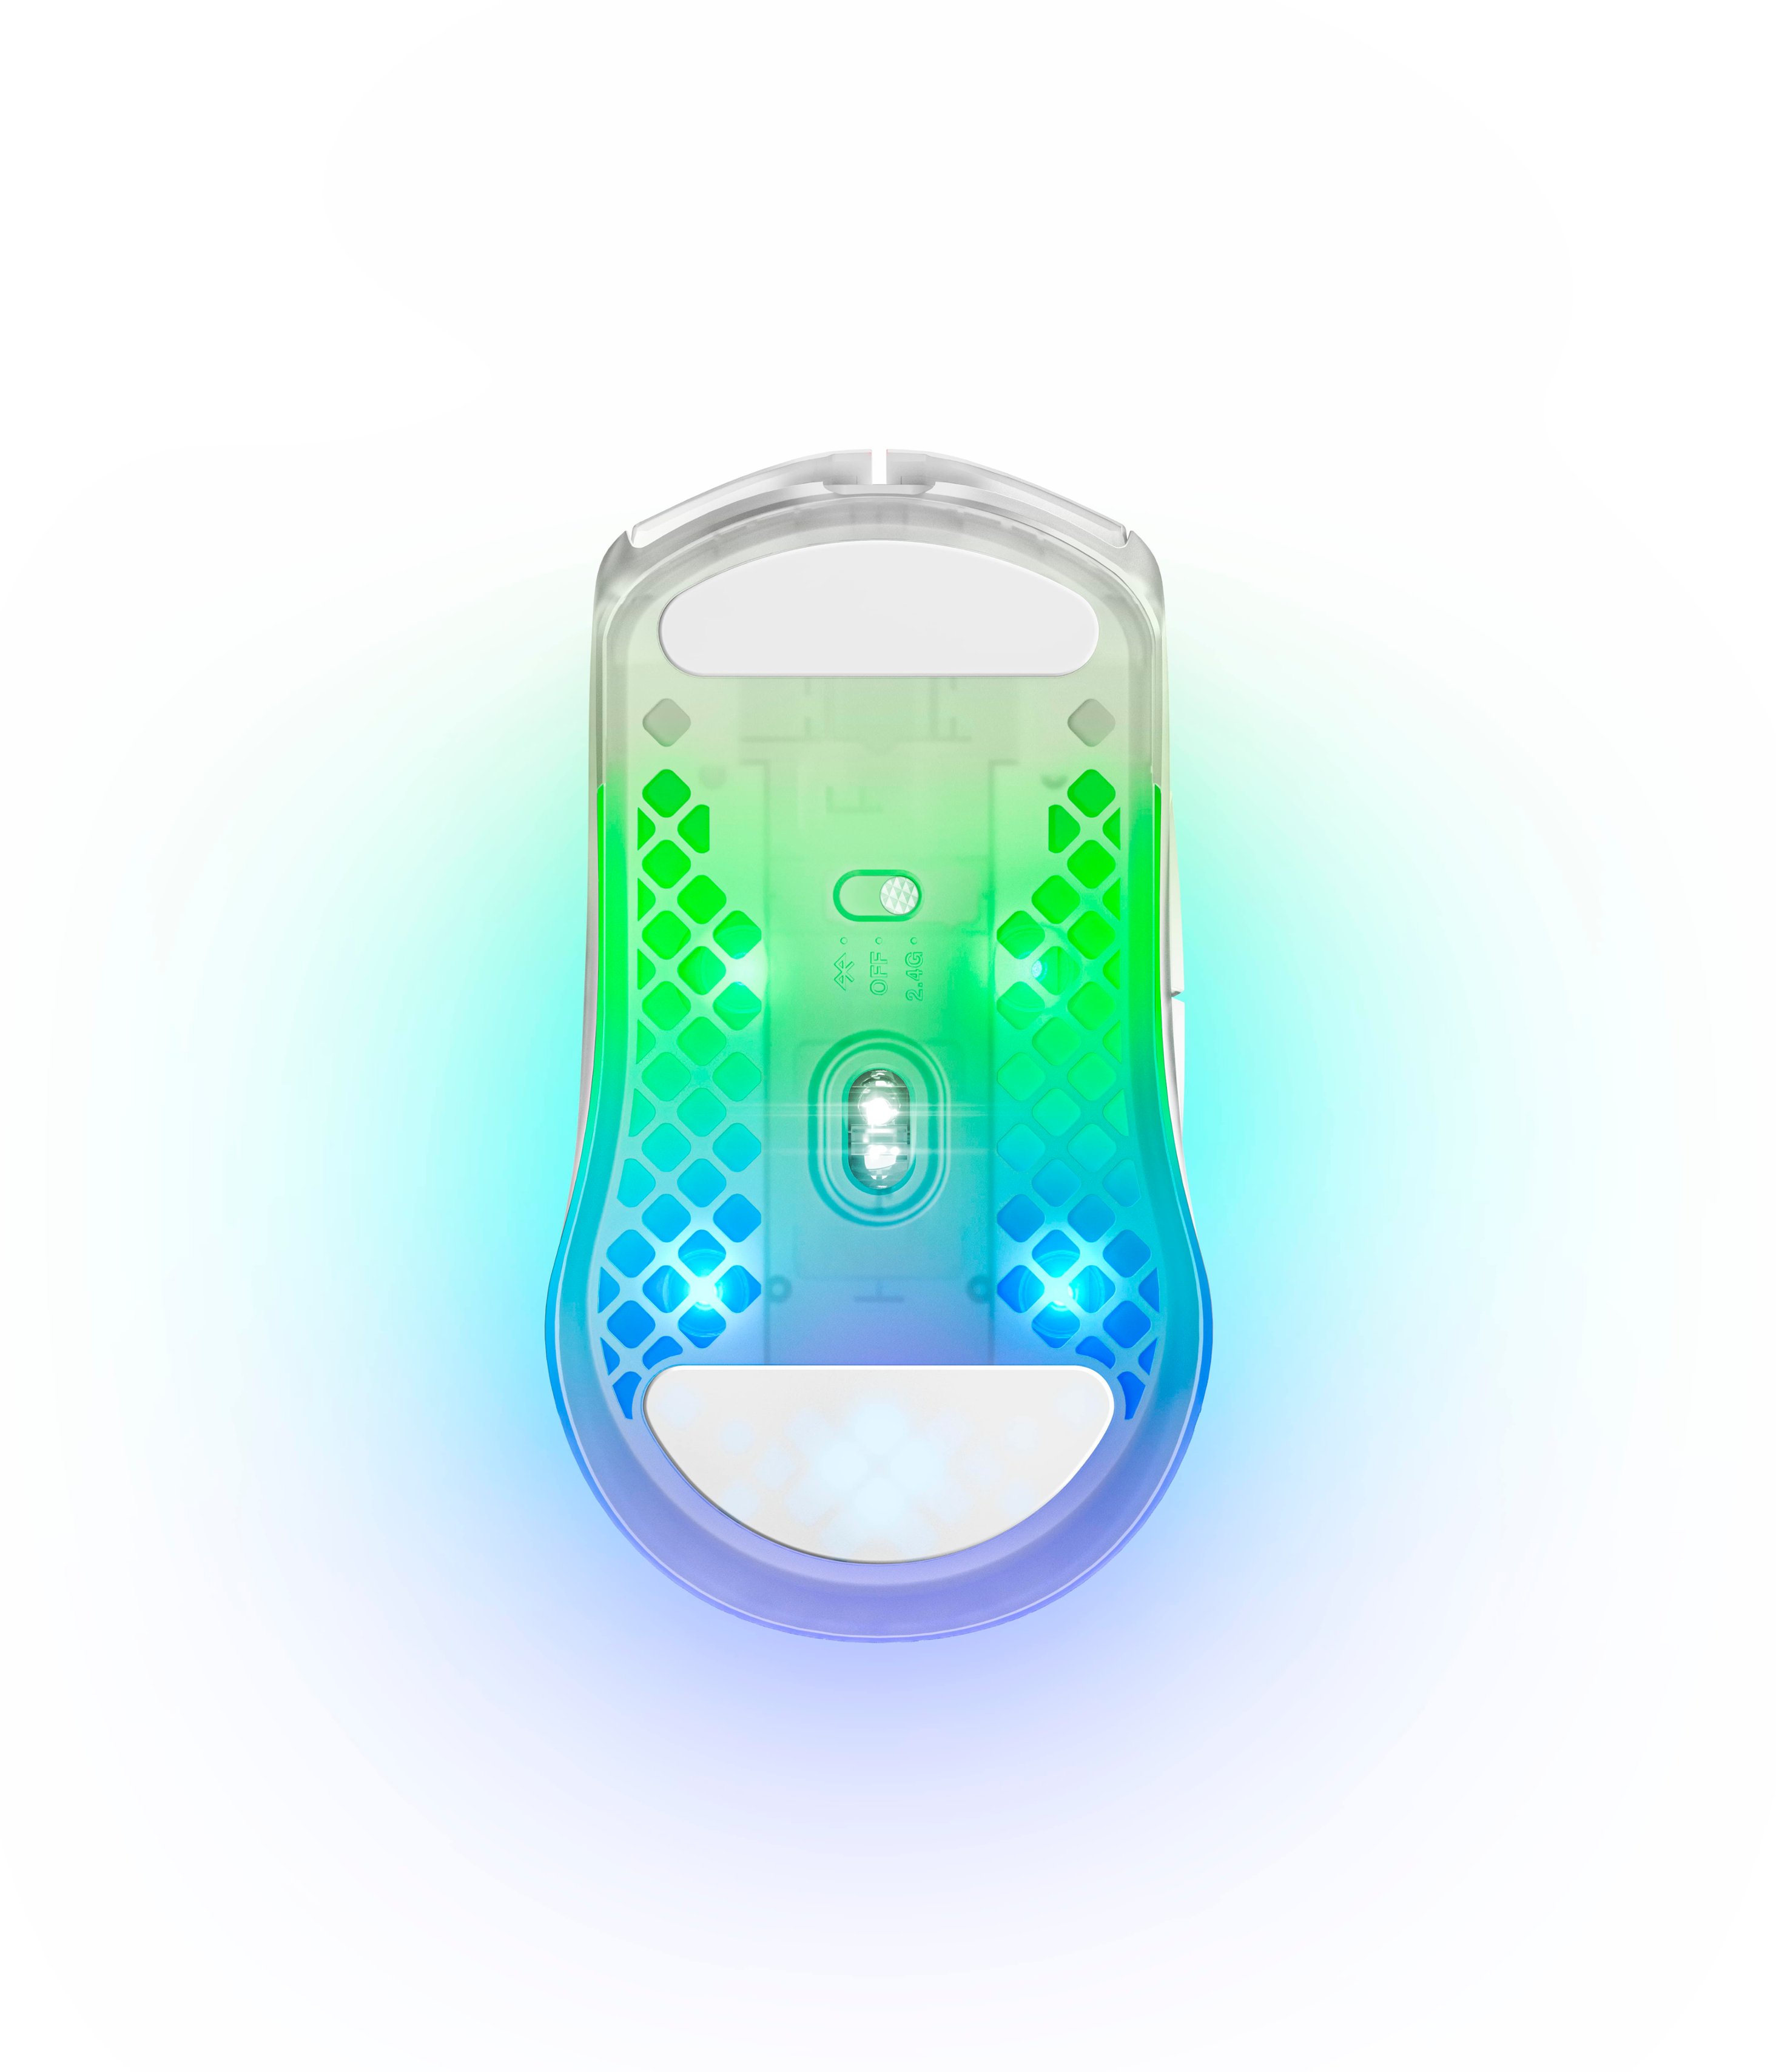 Back View: SteelSeries - Aerox 3 Ghost Lightweight Wireless Optical Gaming Mouse with Translucent Design - White